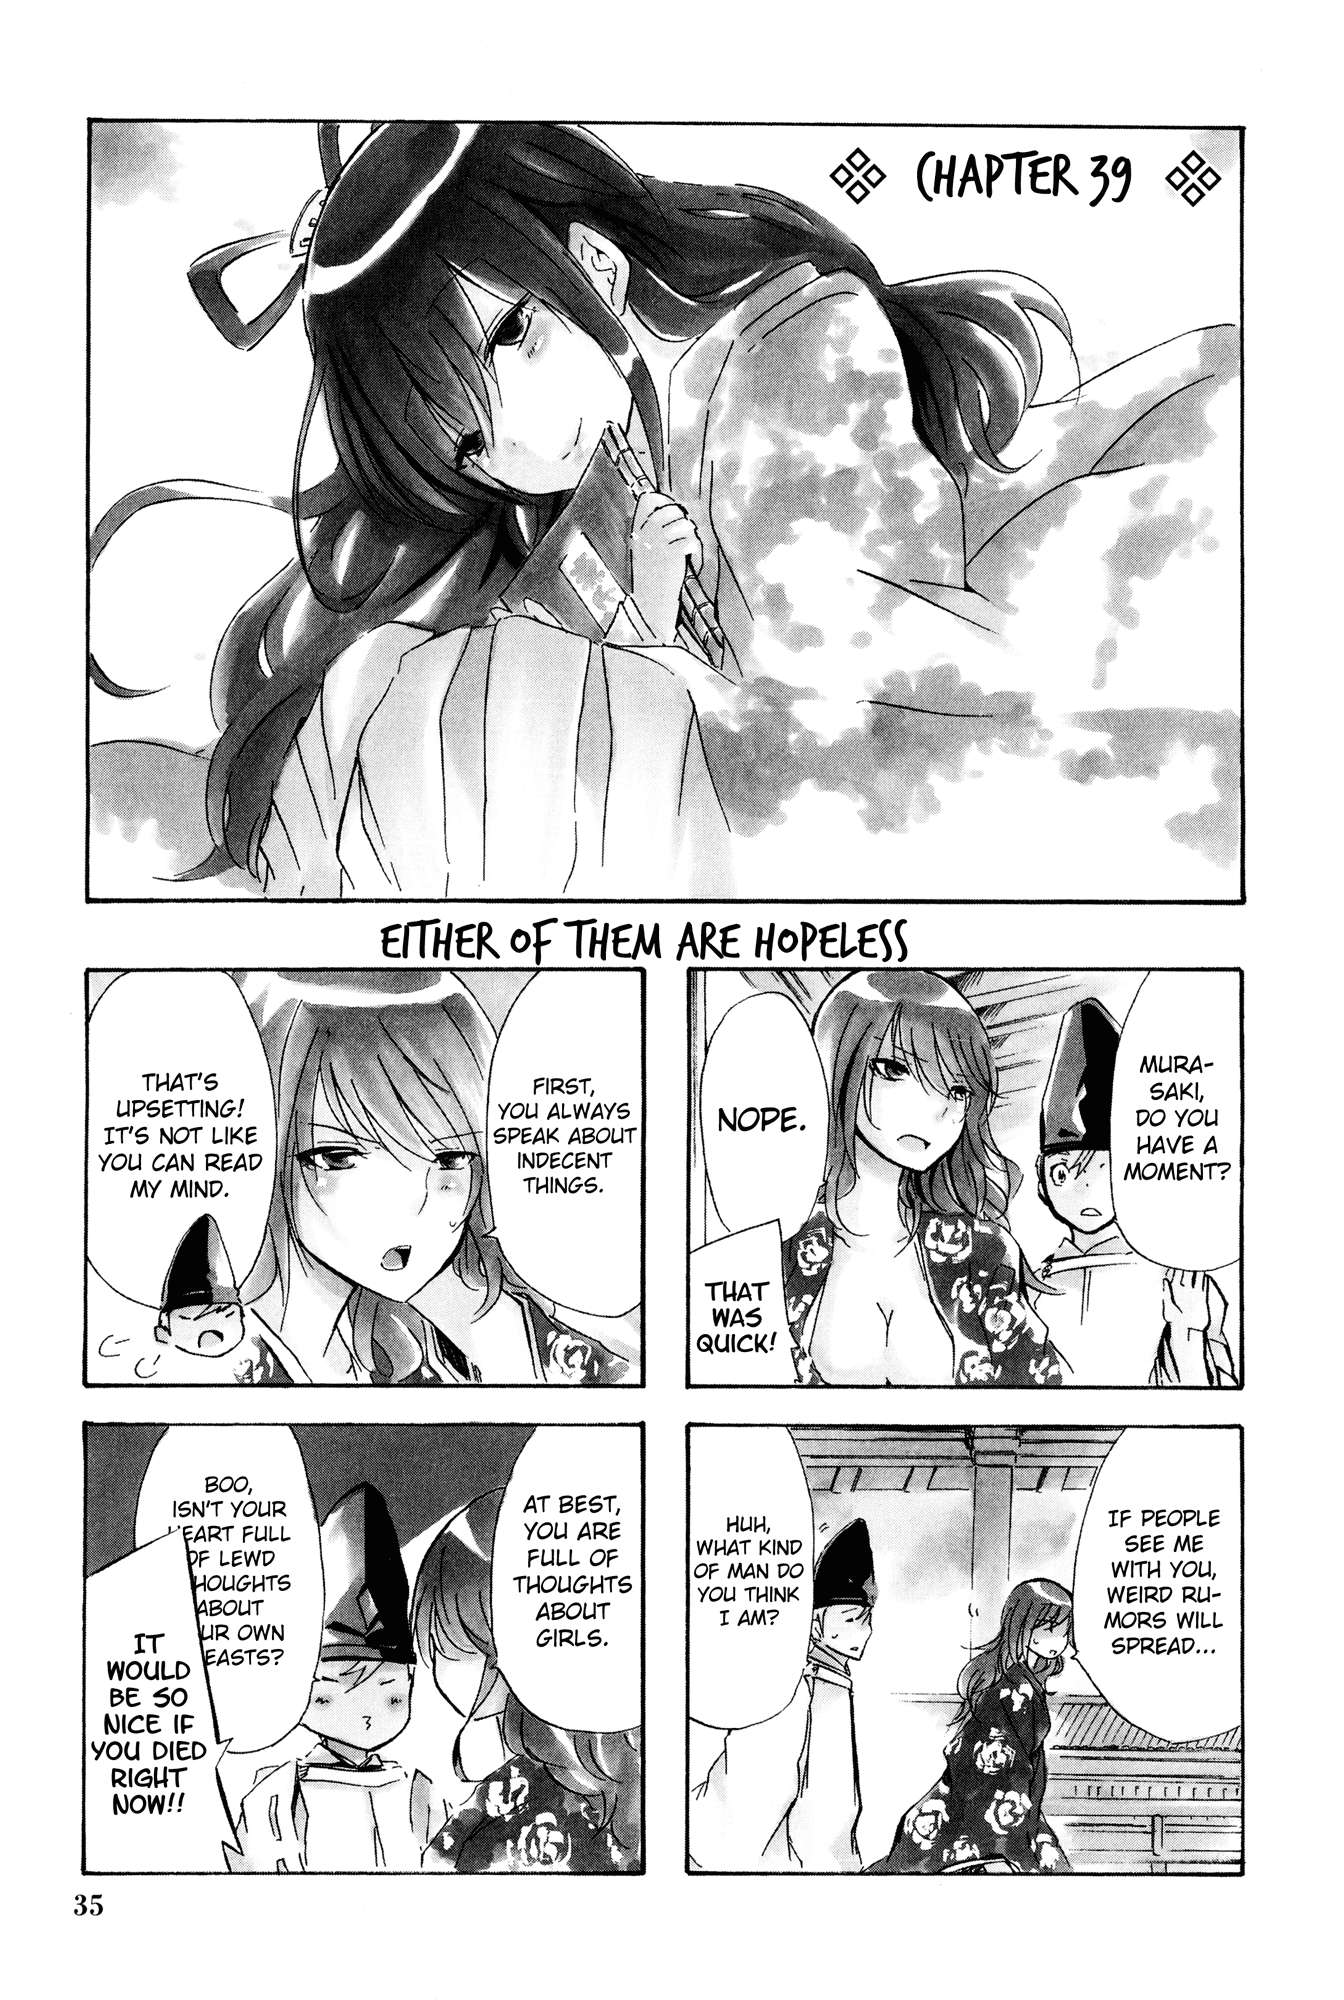 70 Meter Girl Chapter 39: Either Of Them Are Hopeless - Picture 1